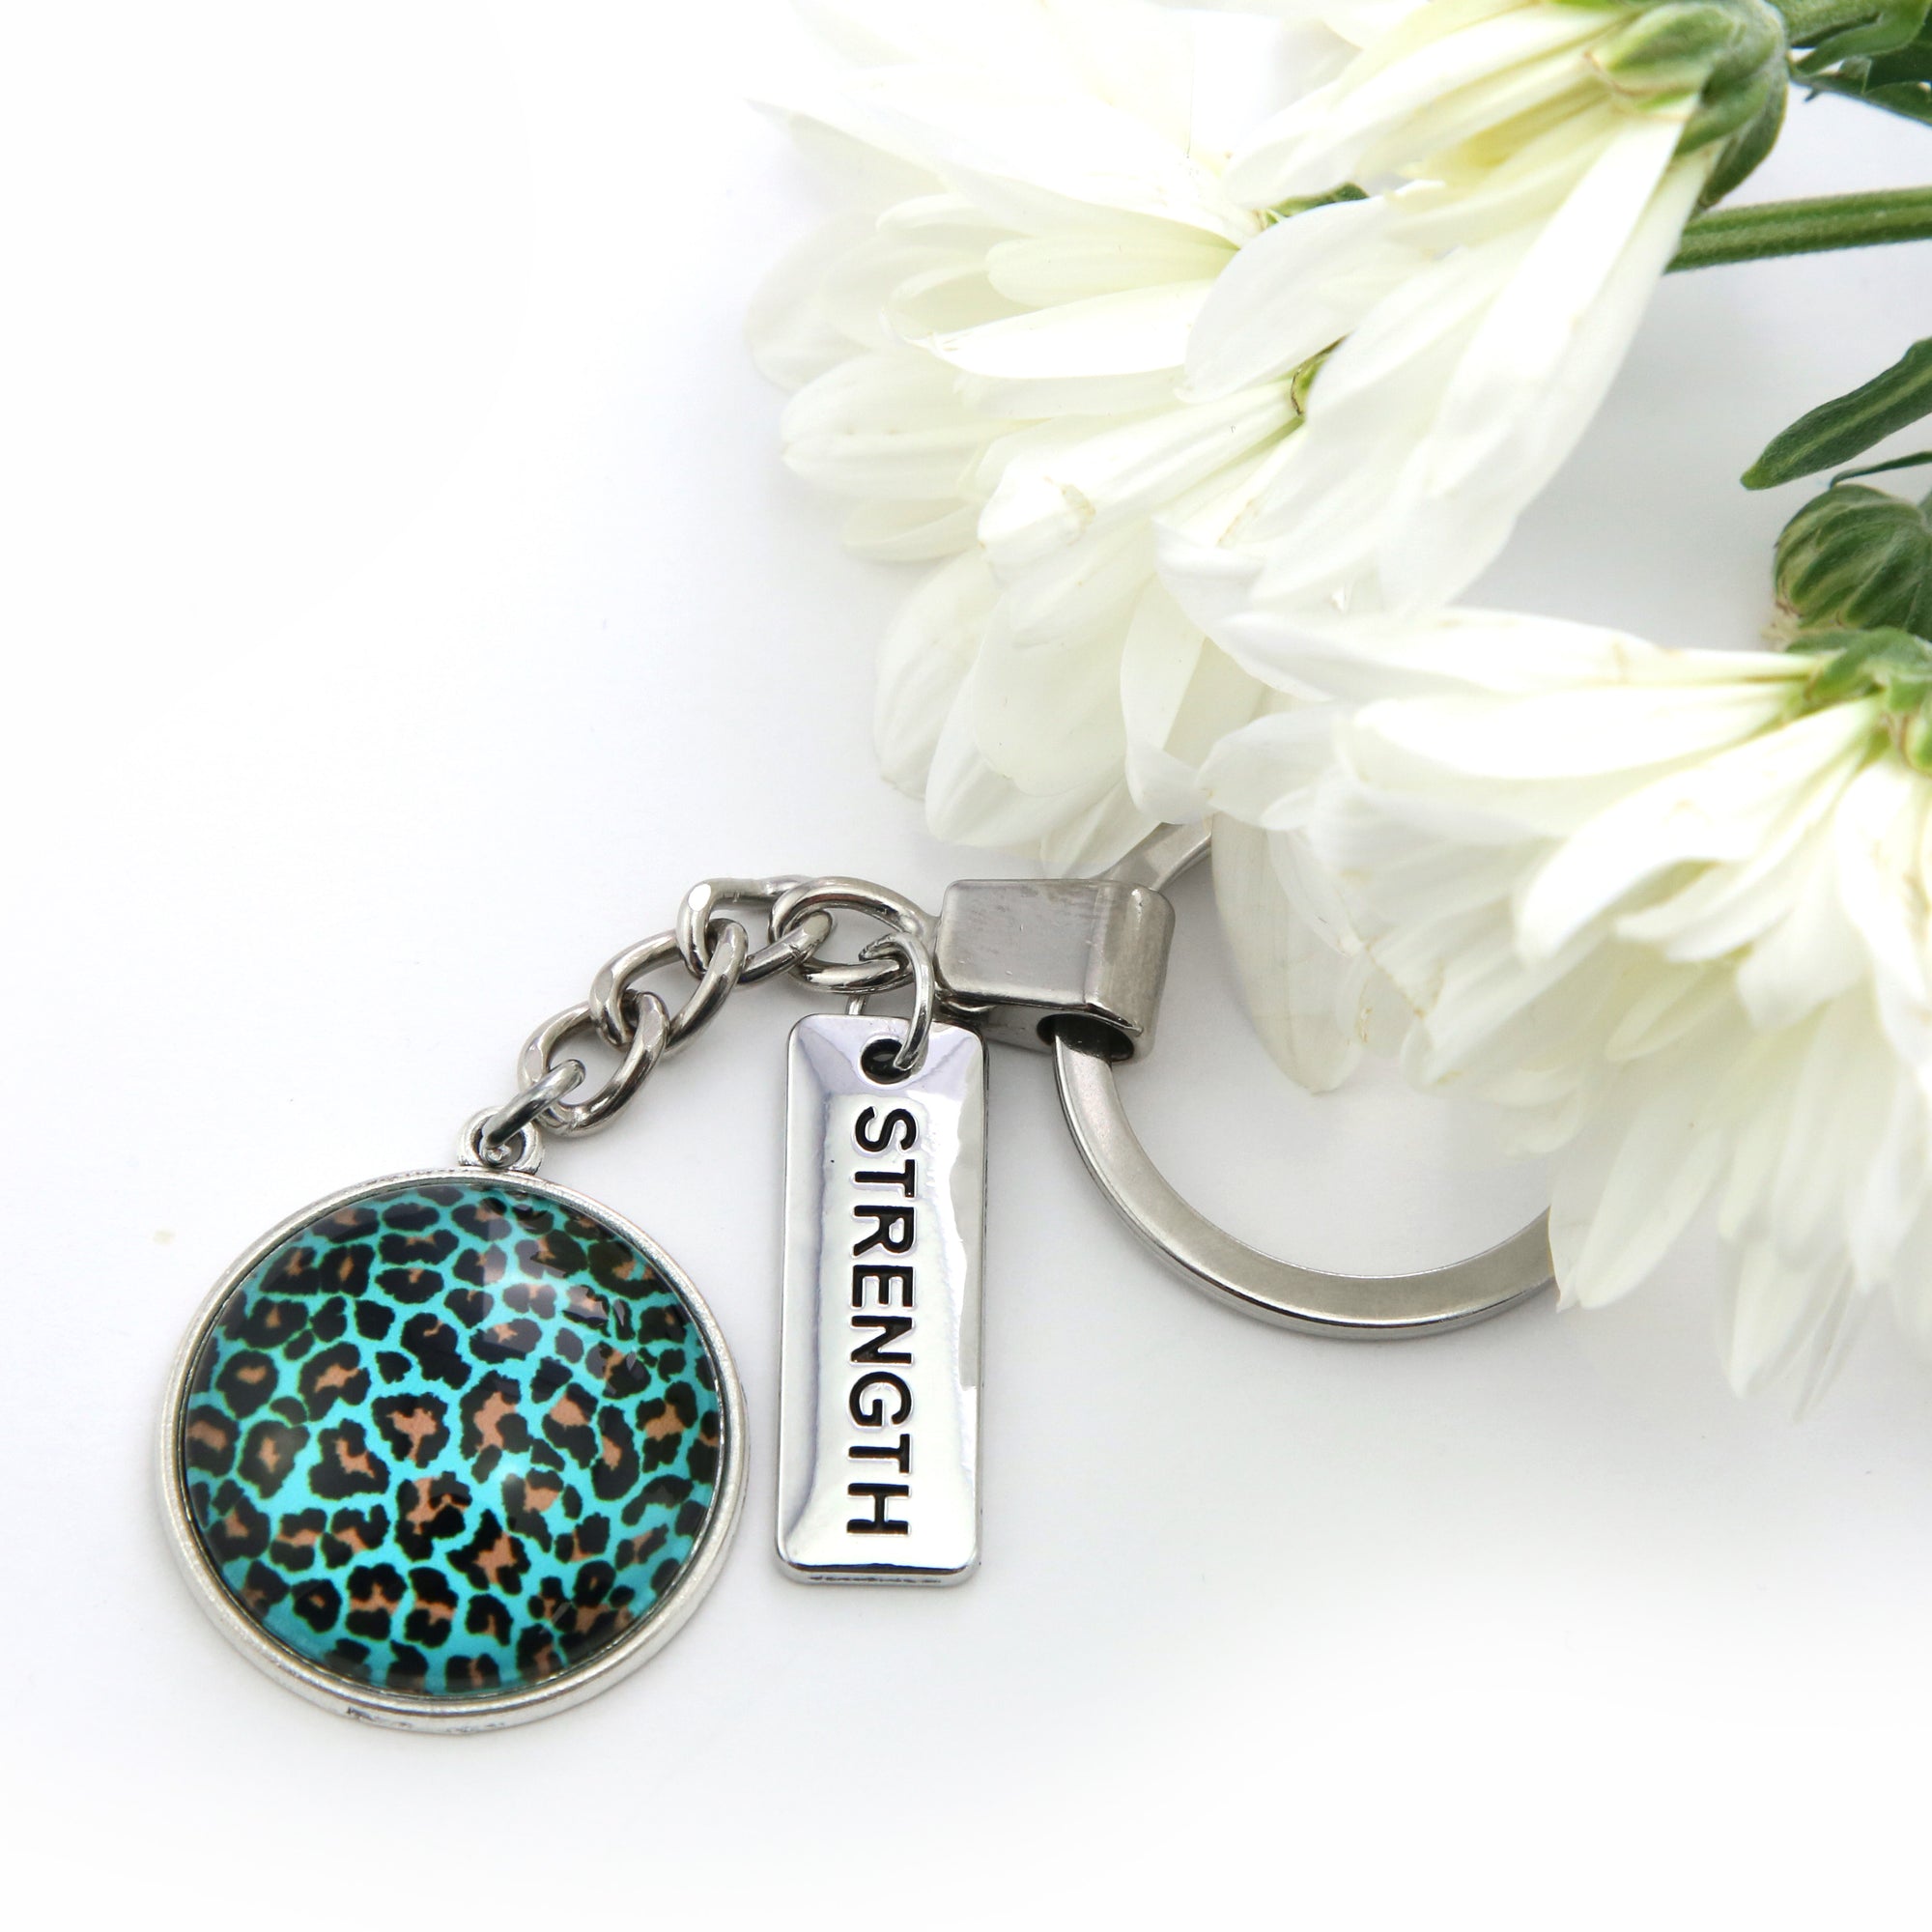 Teal print silver keying accessory with strength charm